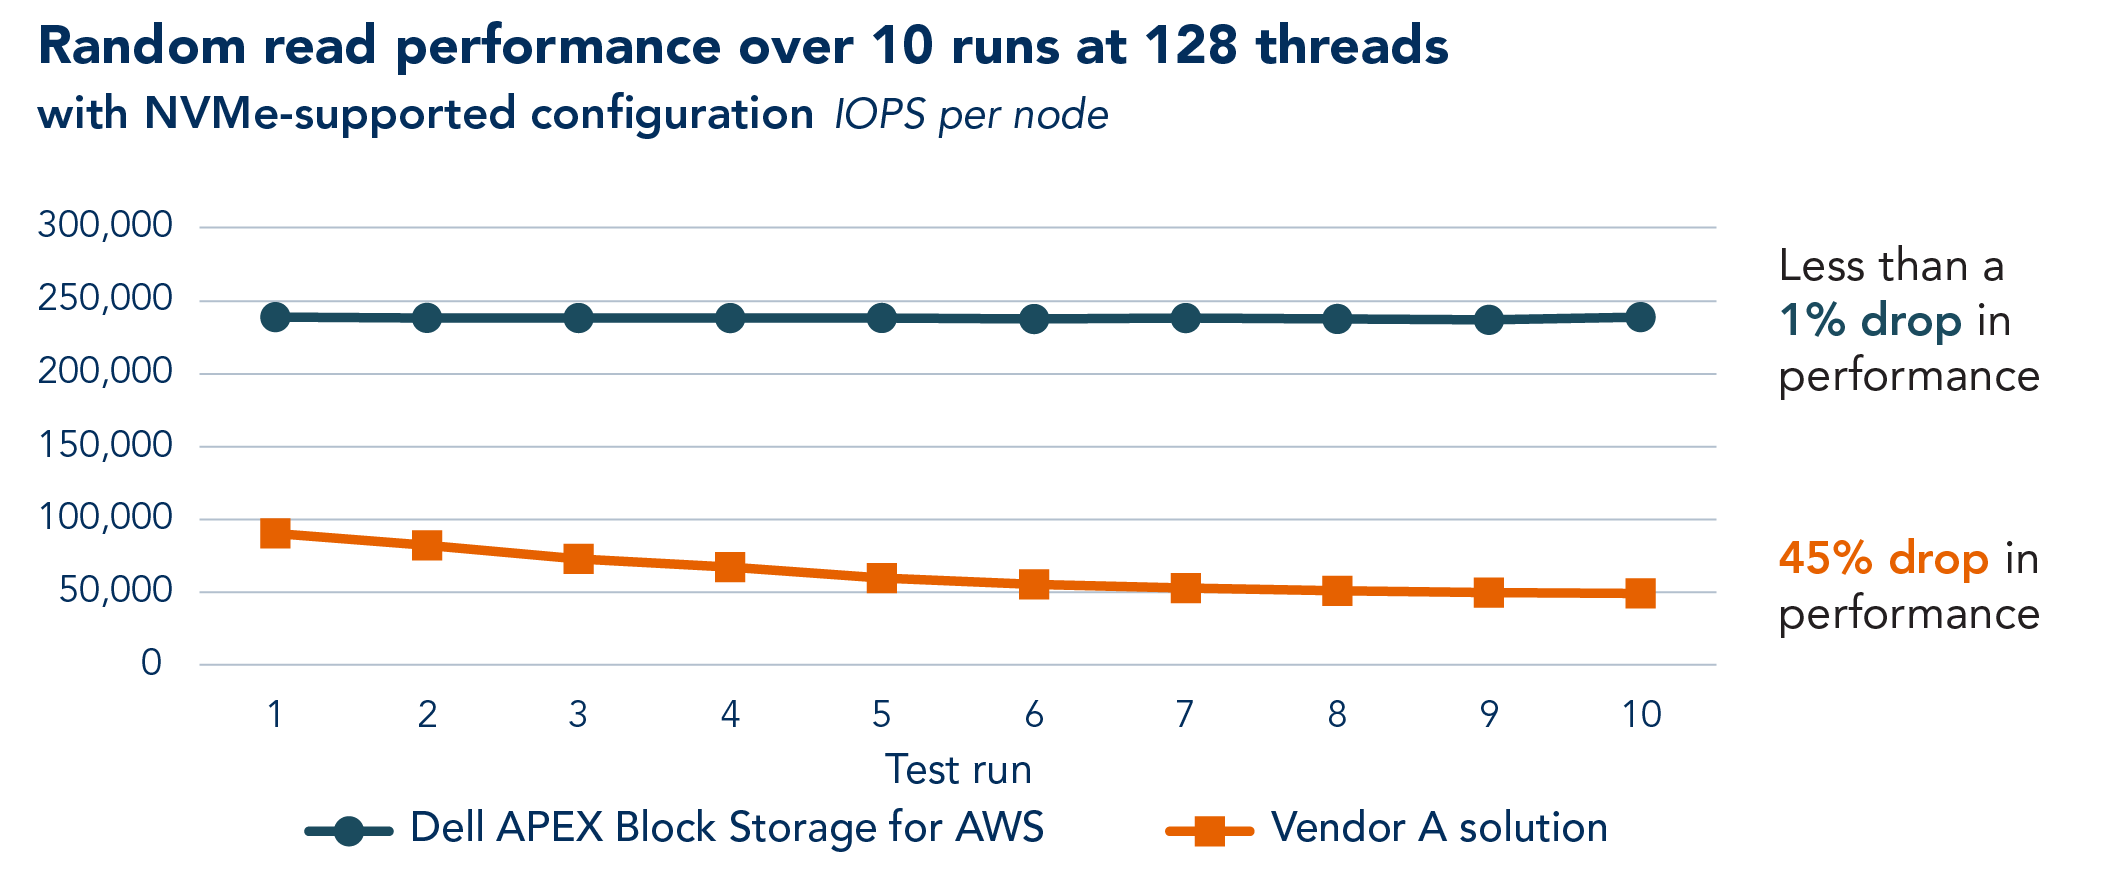 Chart showing the random read performance, over 10 runs of Vdbench at 128 threads, of Dell APEX Block Storage for AWS and the Vendor A solution in their NVMe-supported configurations. Higher, more stable performance is better. The Dell APEX solution holds steady just under 250,000 IOPS per node across the 10 runs, and the chart notes less than a 1% drop in performance. The Vendor A solution starts the first run at just under 100,000 IOPS per node and drops over the course of the next five runs before staying at about the same place for runs 7 through 10, at about 50,000 IOPS per node. For the Vendor A solution, the chart notes a 45% drop in performance. 